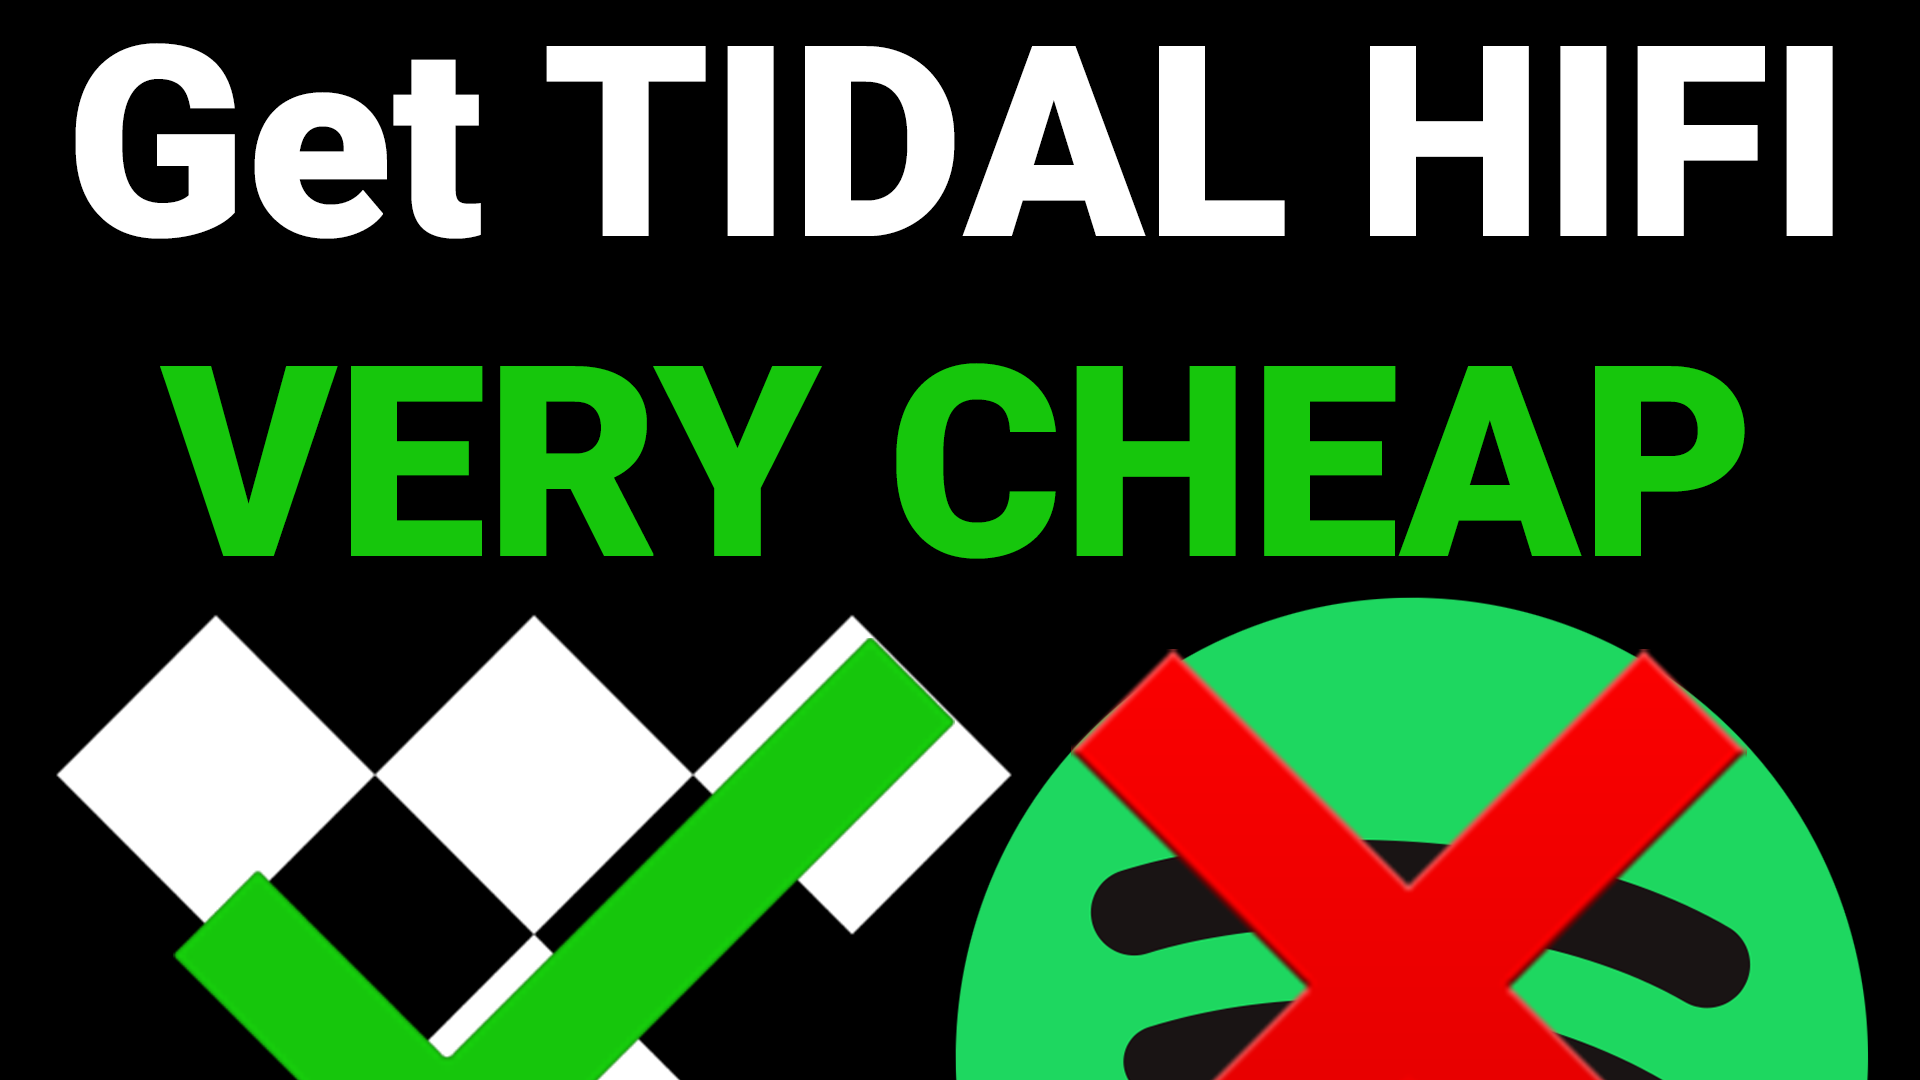 Get The Most Expensive Tidal Family Plan For Under 3 Dollars Per Month